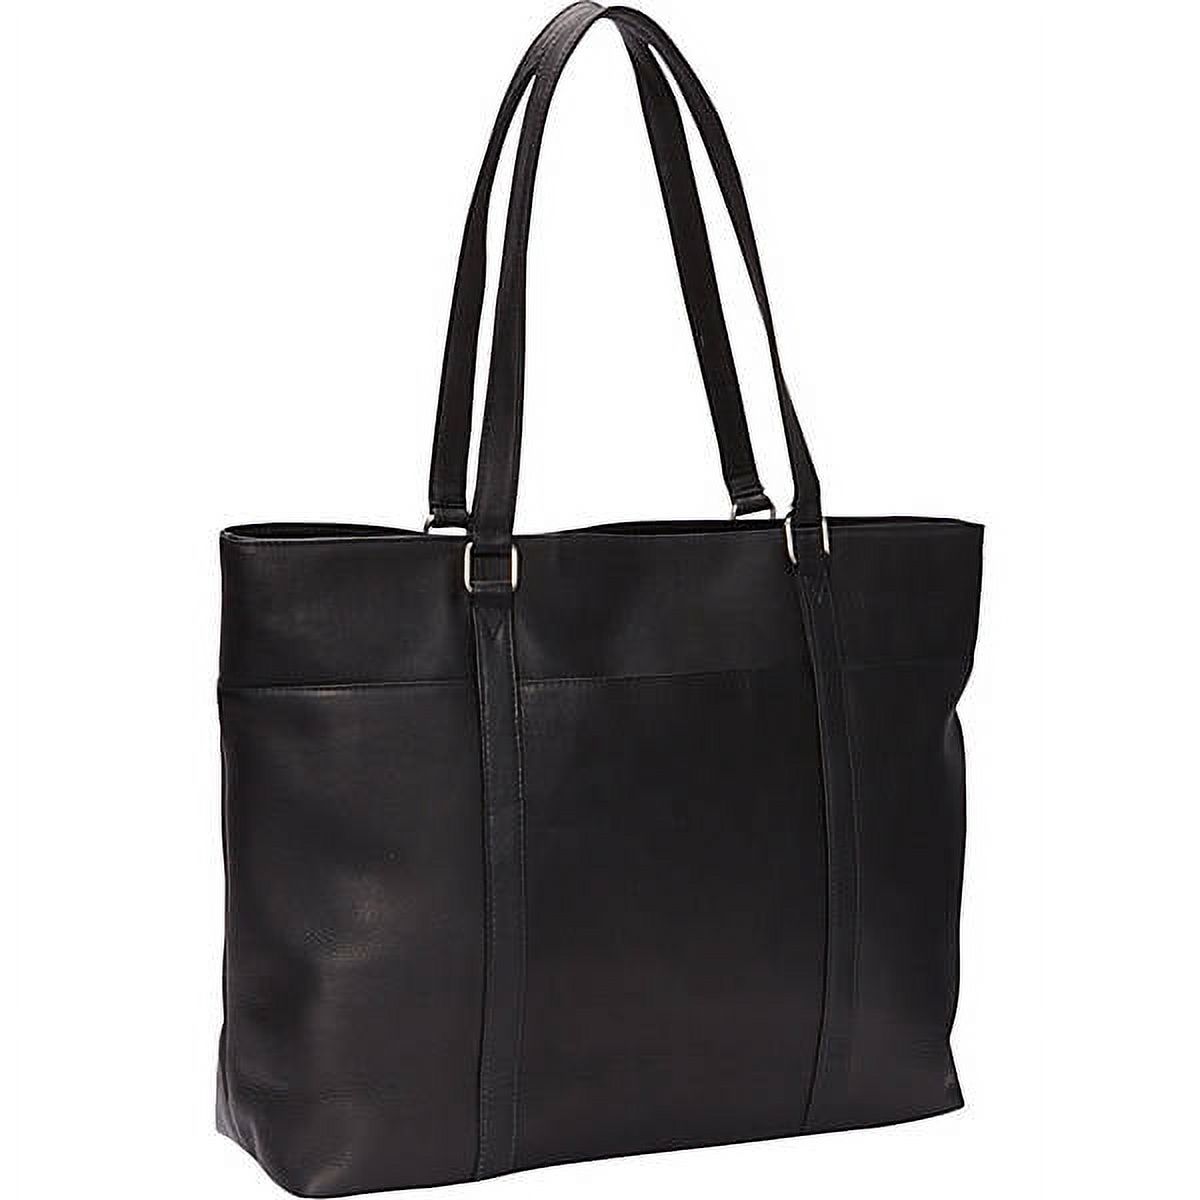 Le Donne Leather Women's Laptop Tote TR-1063 - image 1 of 4